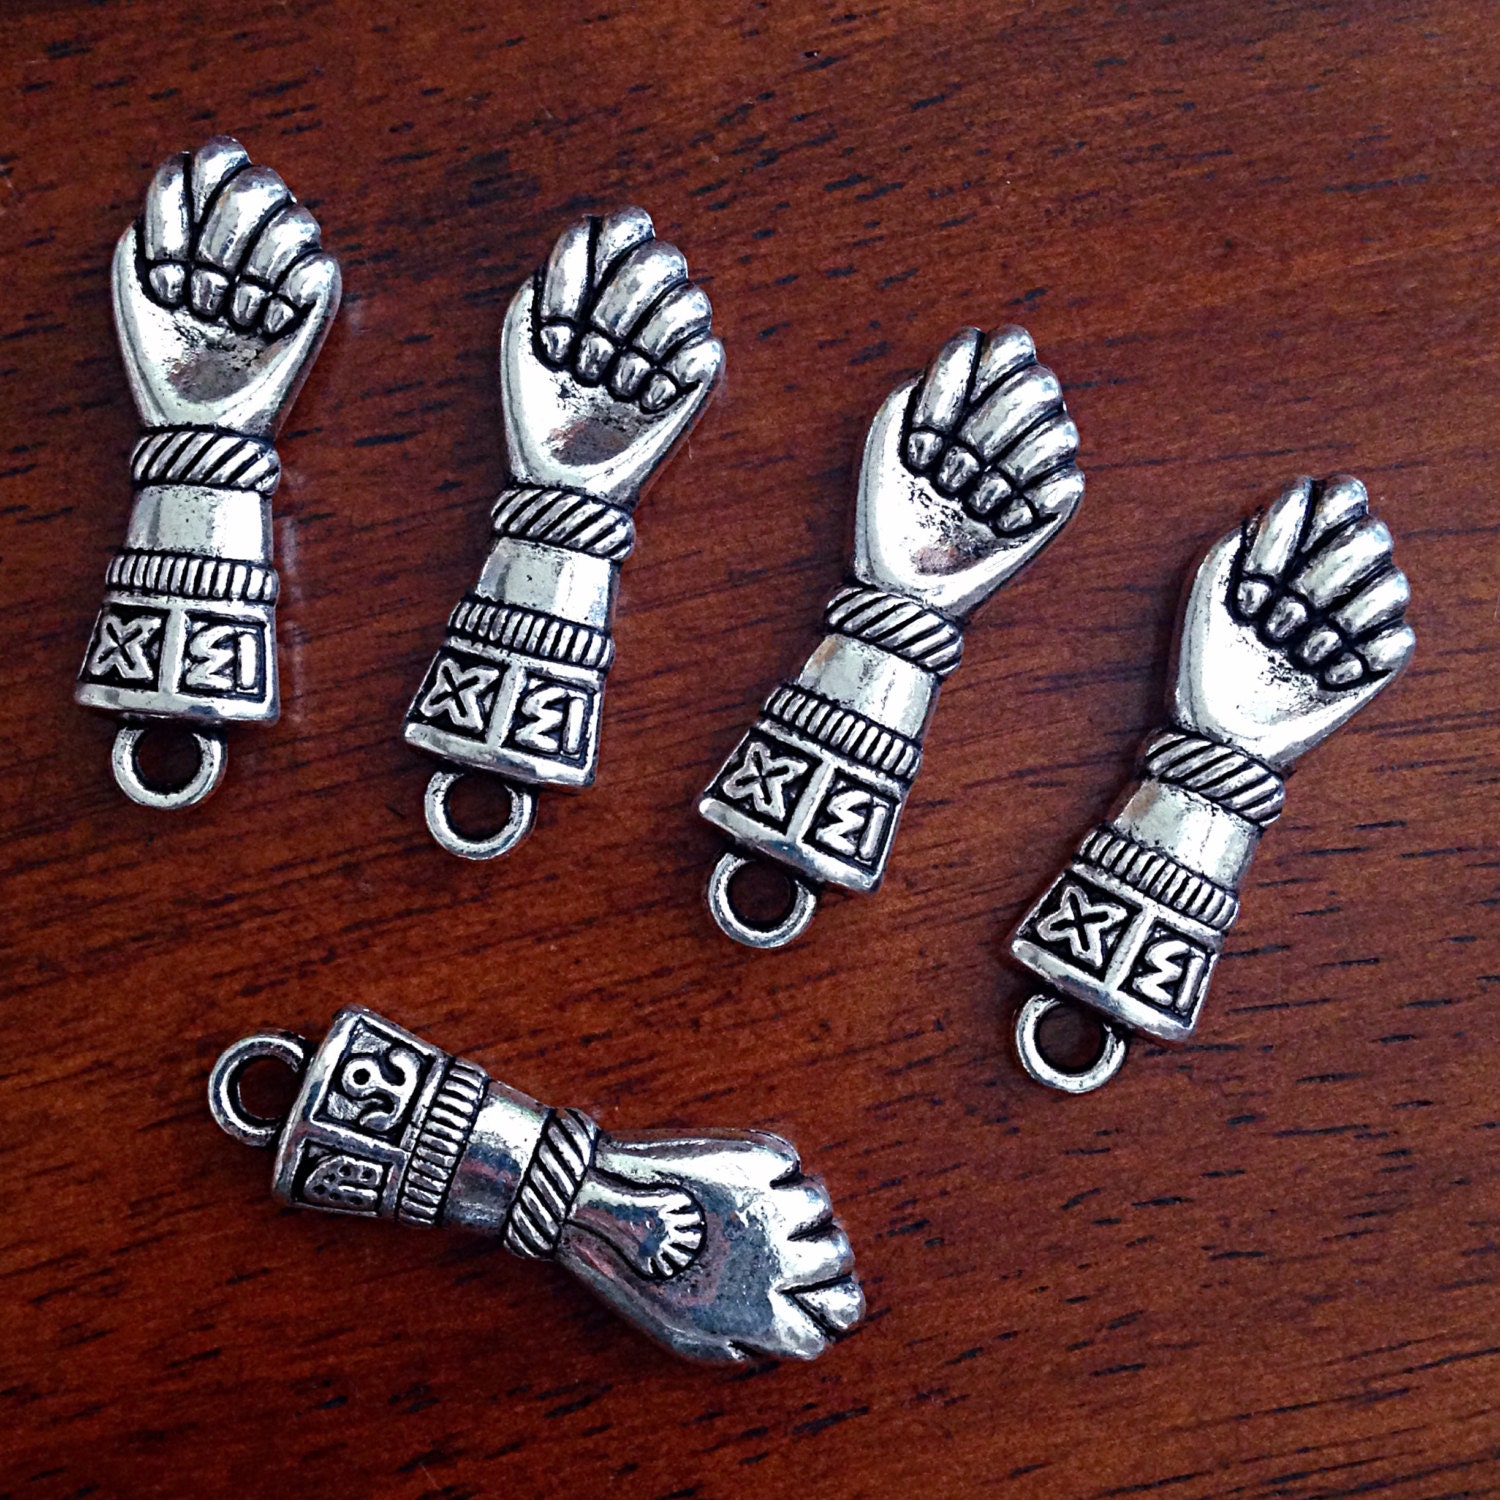 5 Large Brazilian Figa Fist Charms Antique Silver Charms